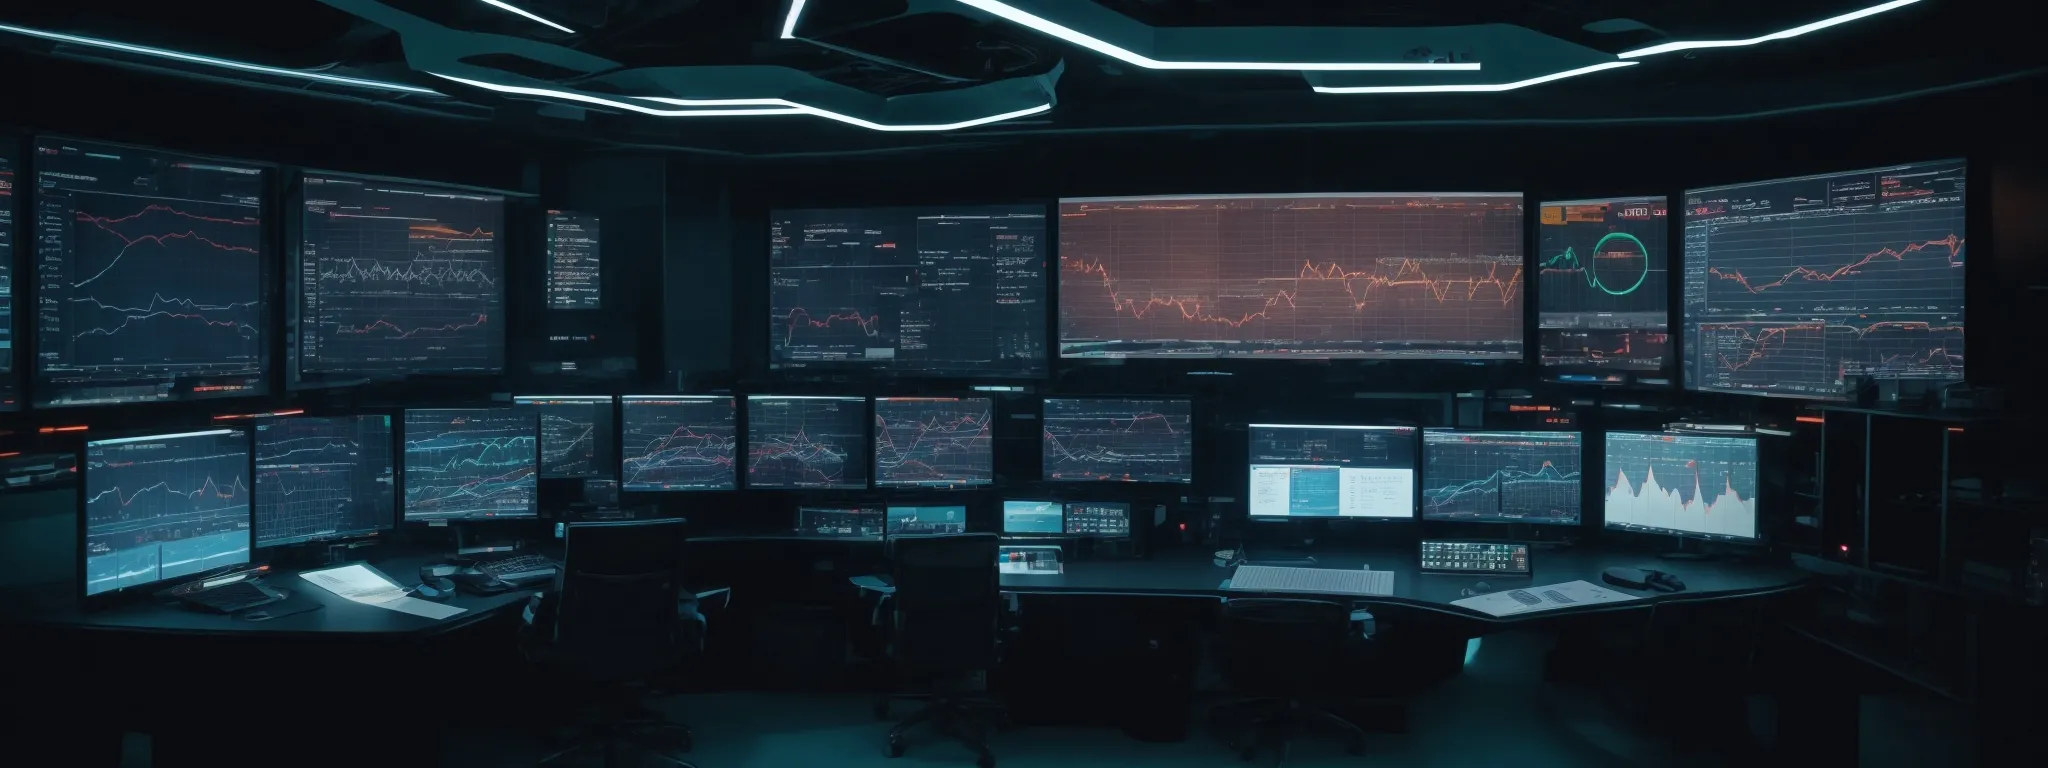 a futuristic control room with screens displaying graphs and data analytics to symbolize strategy in digital marketing.